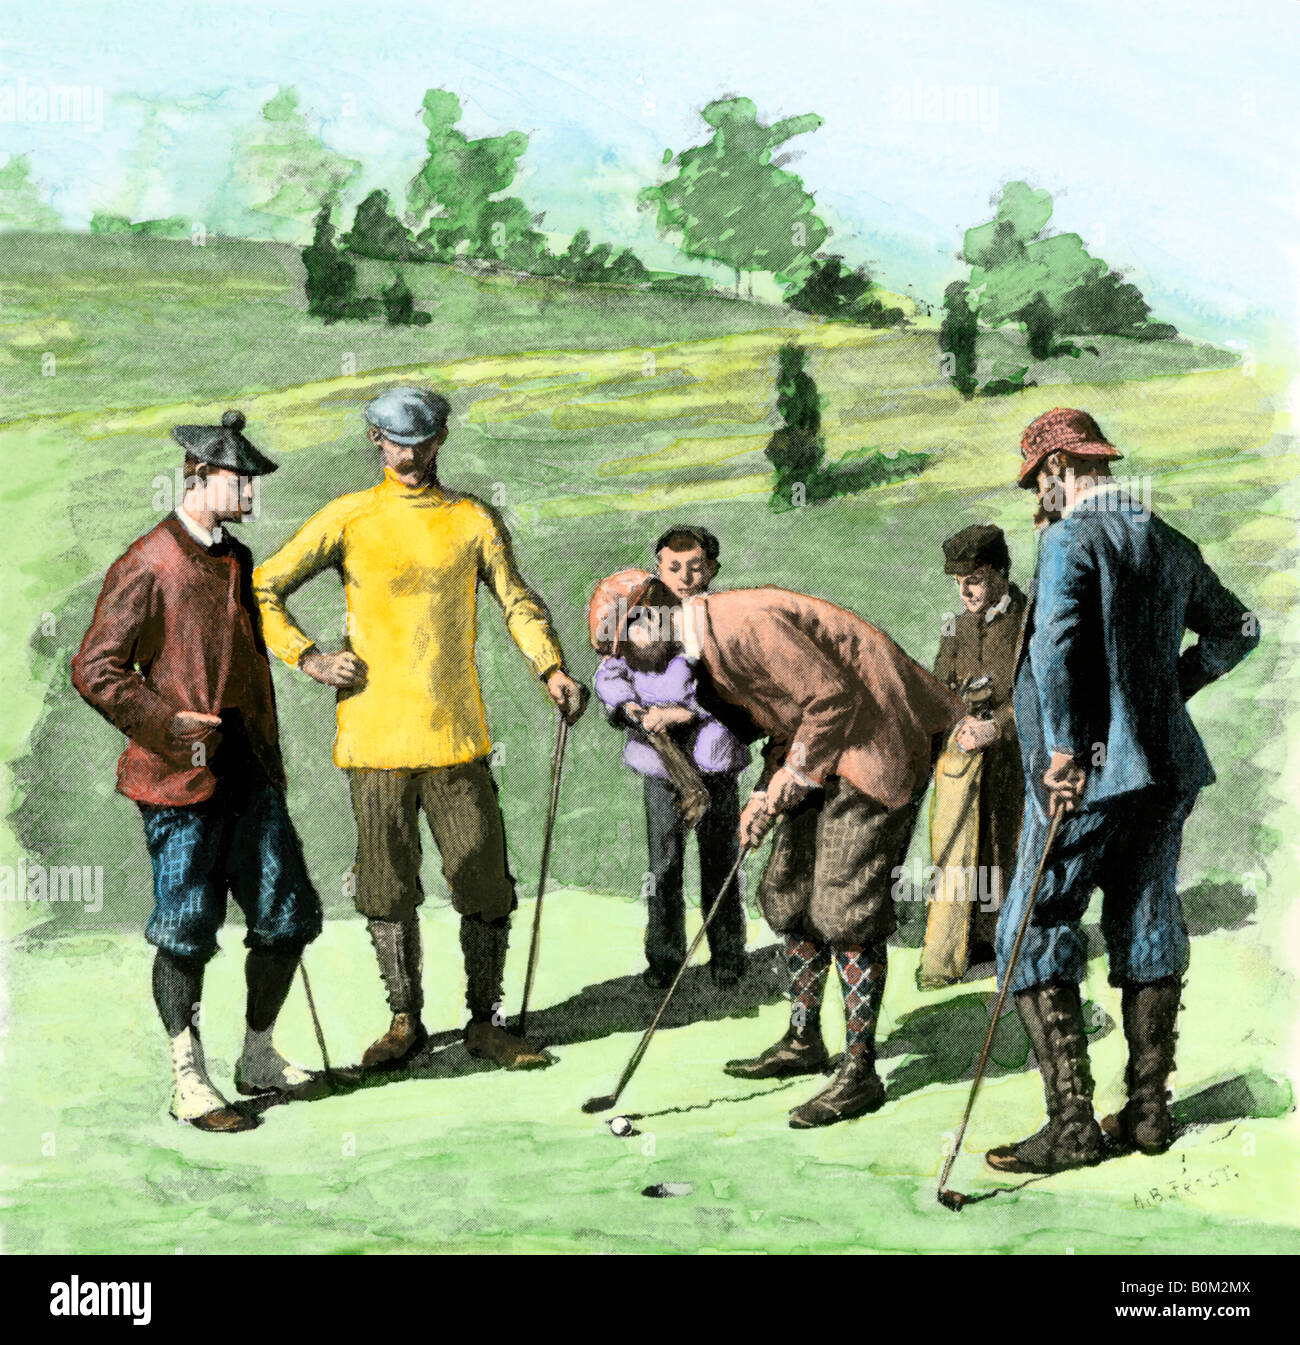 Golfers finishing a game at the putting green circa 1890. Hand-colored halftone of an illustration Stock Photo